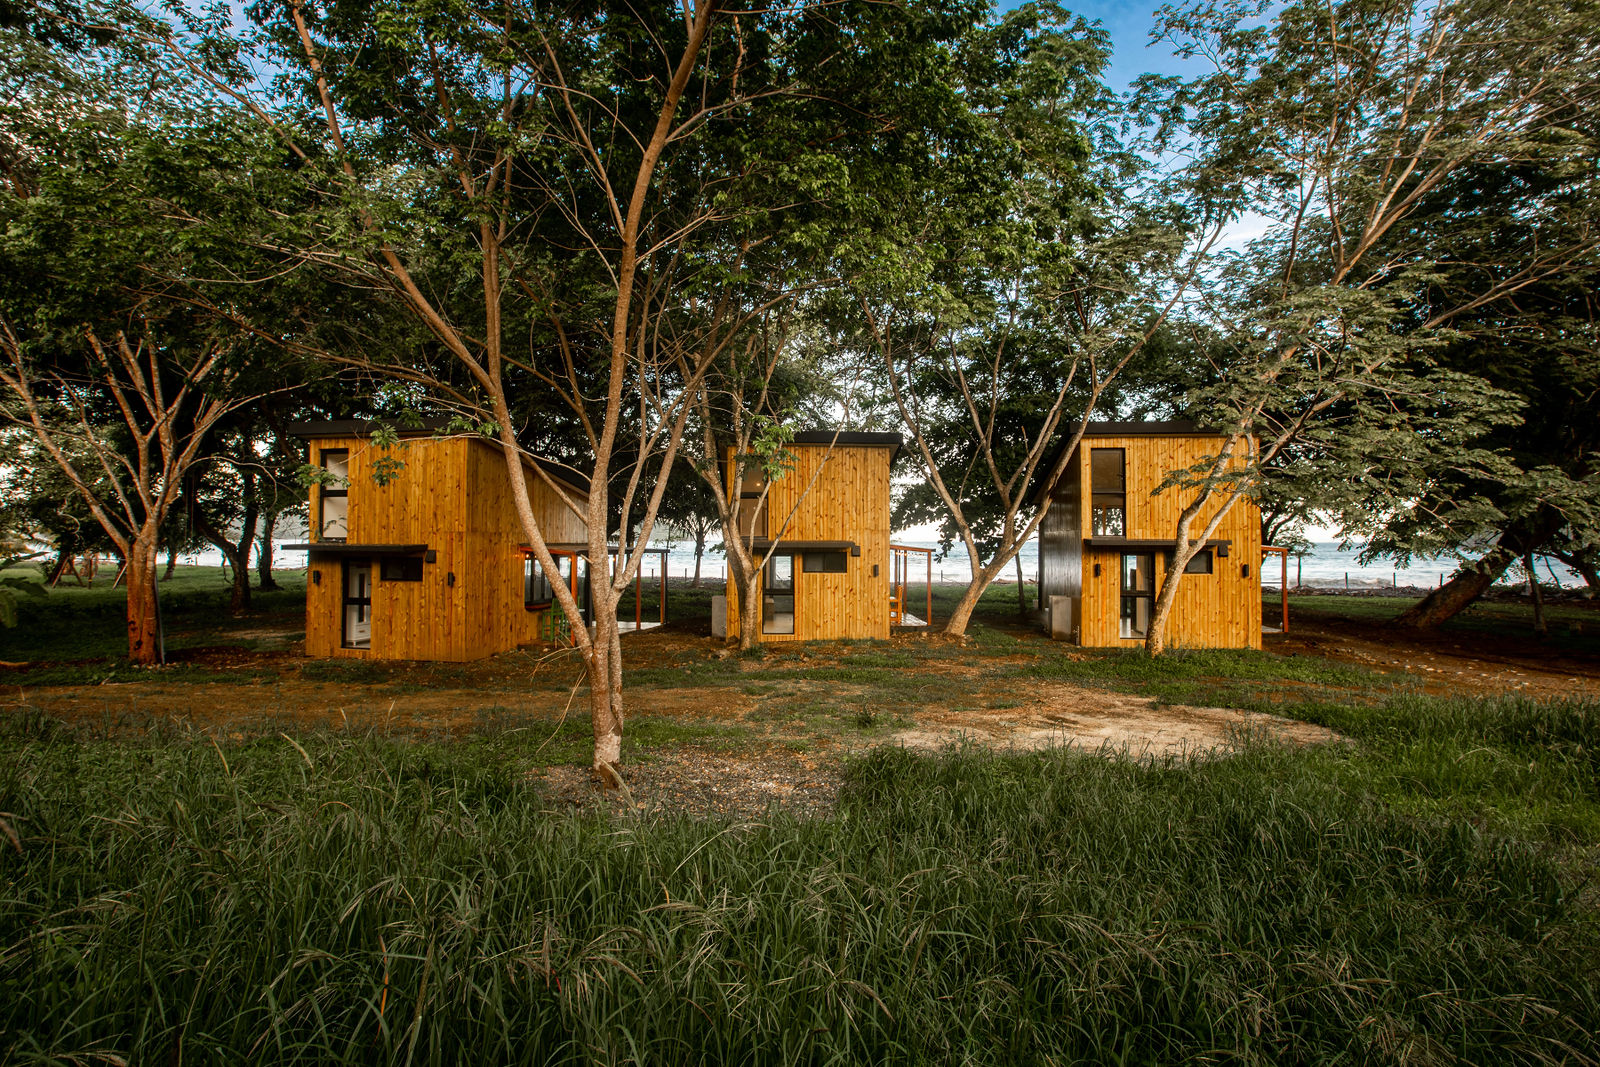 Live in a tiny home in Panama, sustainable living, eco friendly construction